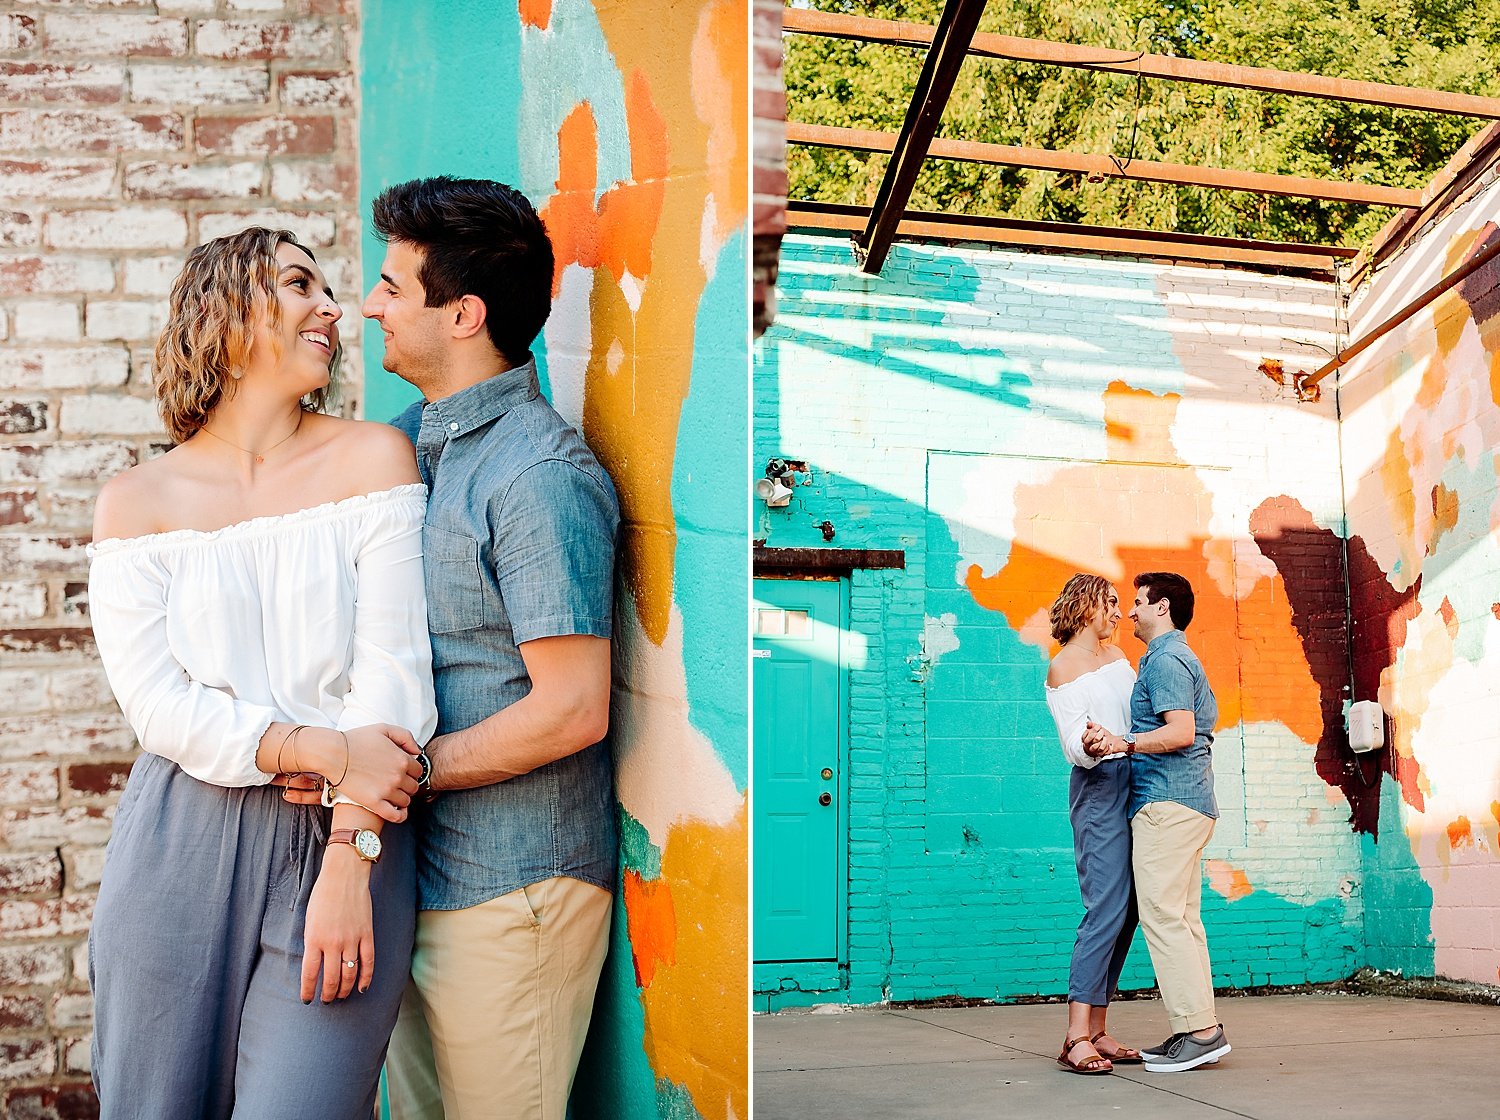 Downtown_York_Royal_Square_Murals_Summer_Engagement_Session_0032.jpg